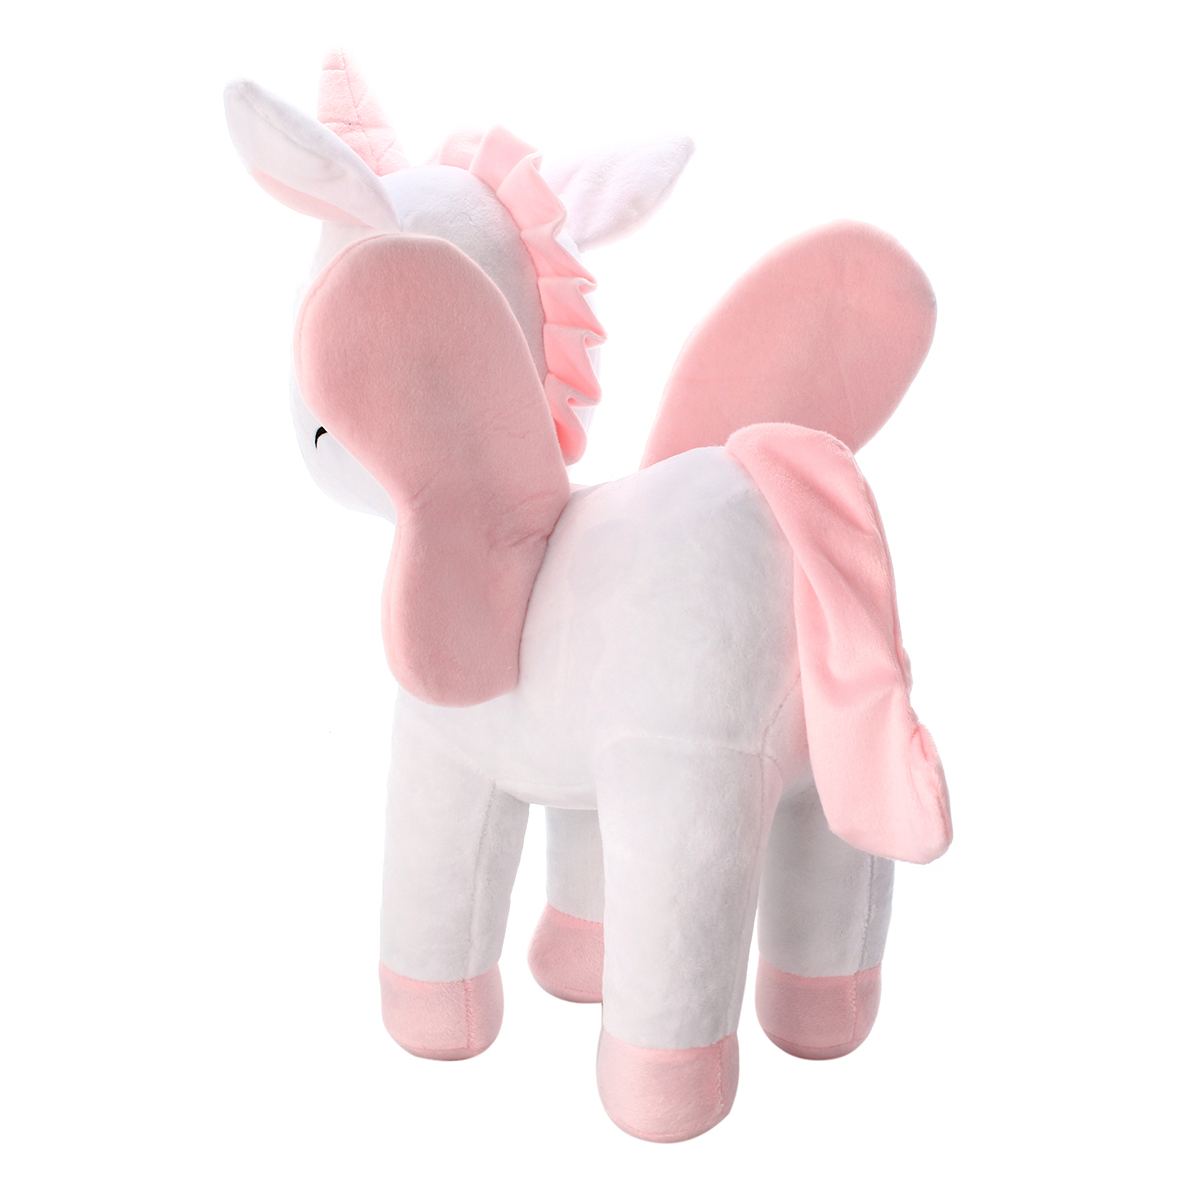 16-Inches-Soft-Giant-Unicorn-Stuffed-Plush-Toy-Animal-Doll-Children-Gifts-Photo-Props-Gift-1299365-6